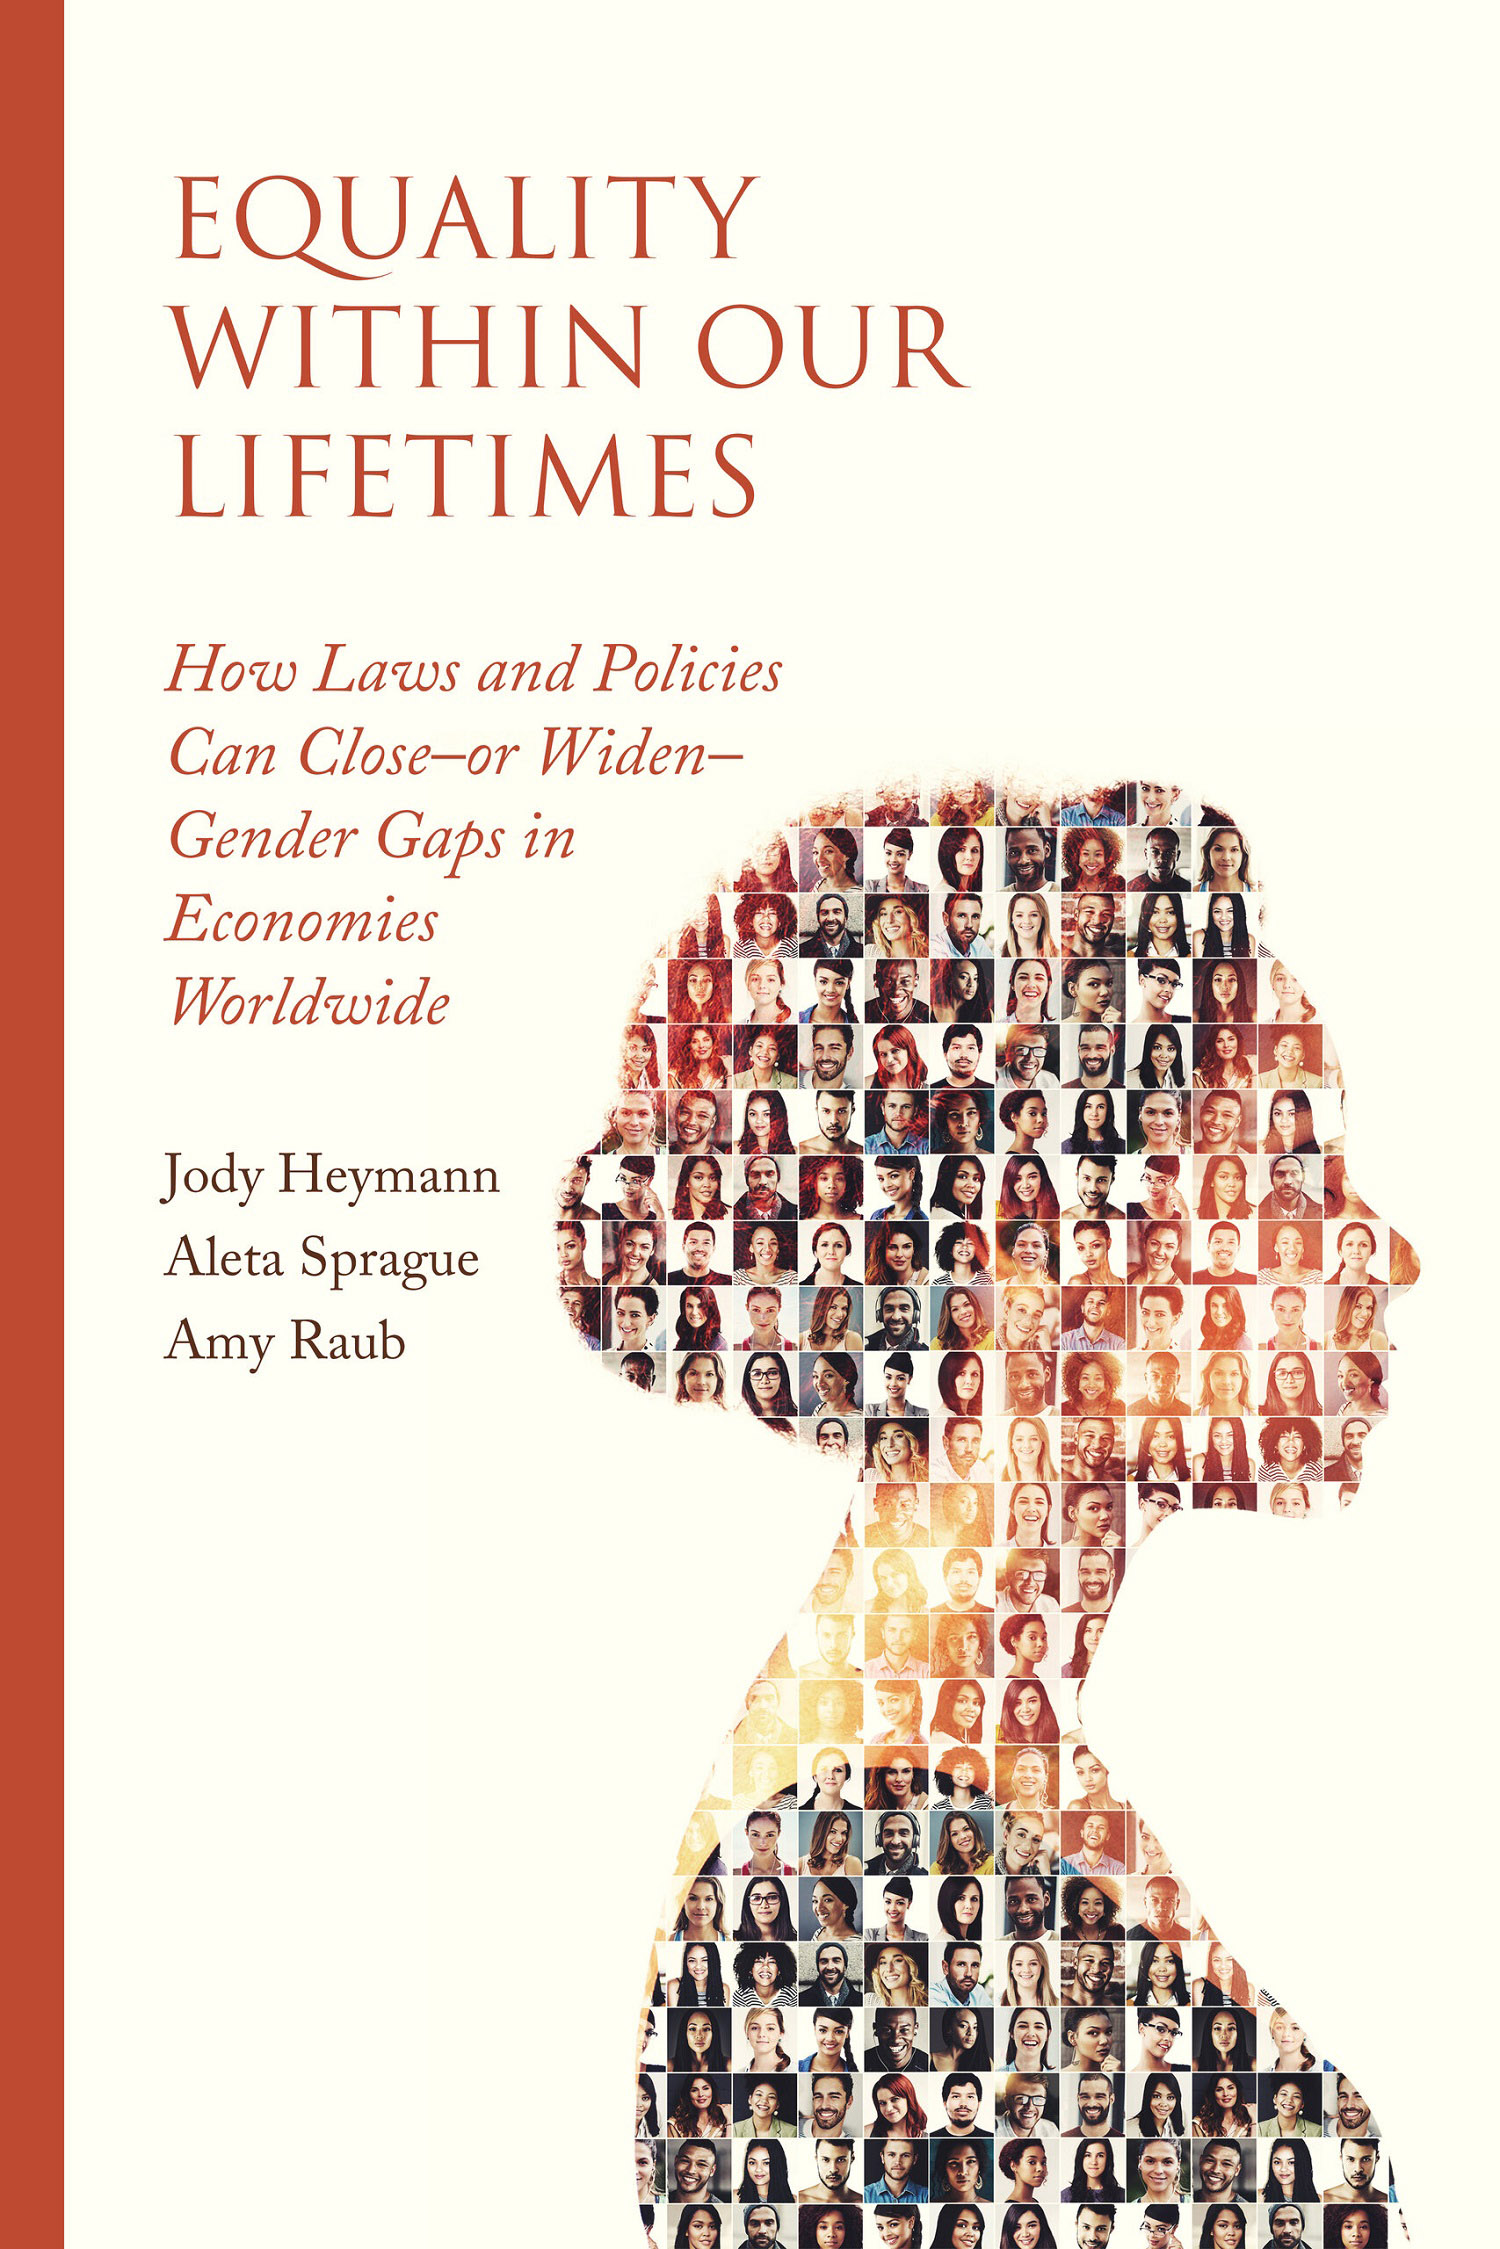 Cover of the book "Equality Within Our Lifetimes"